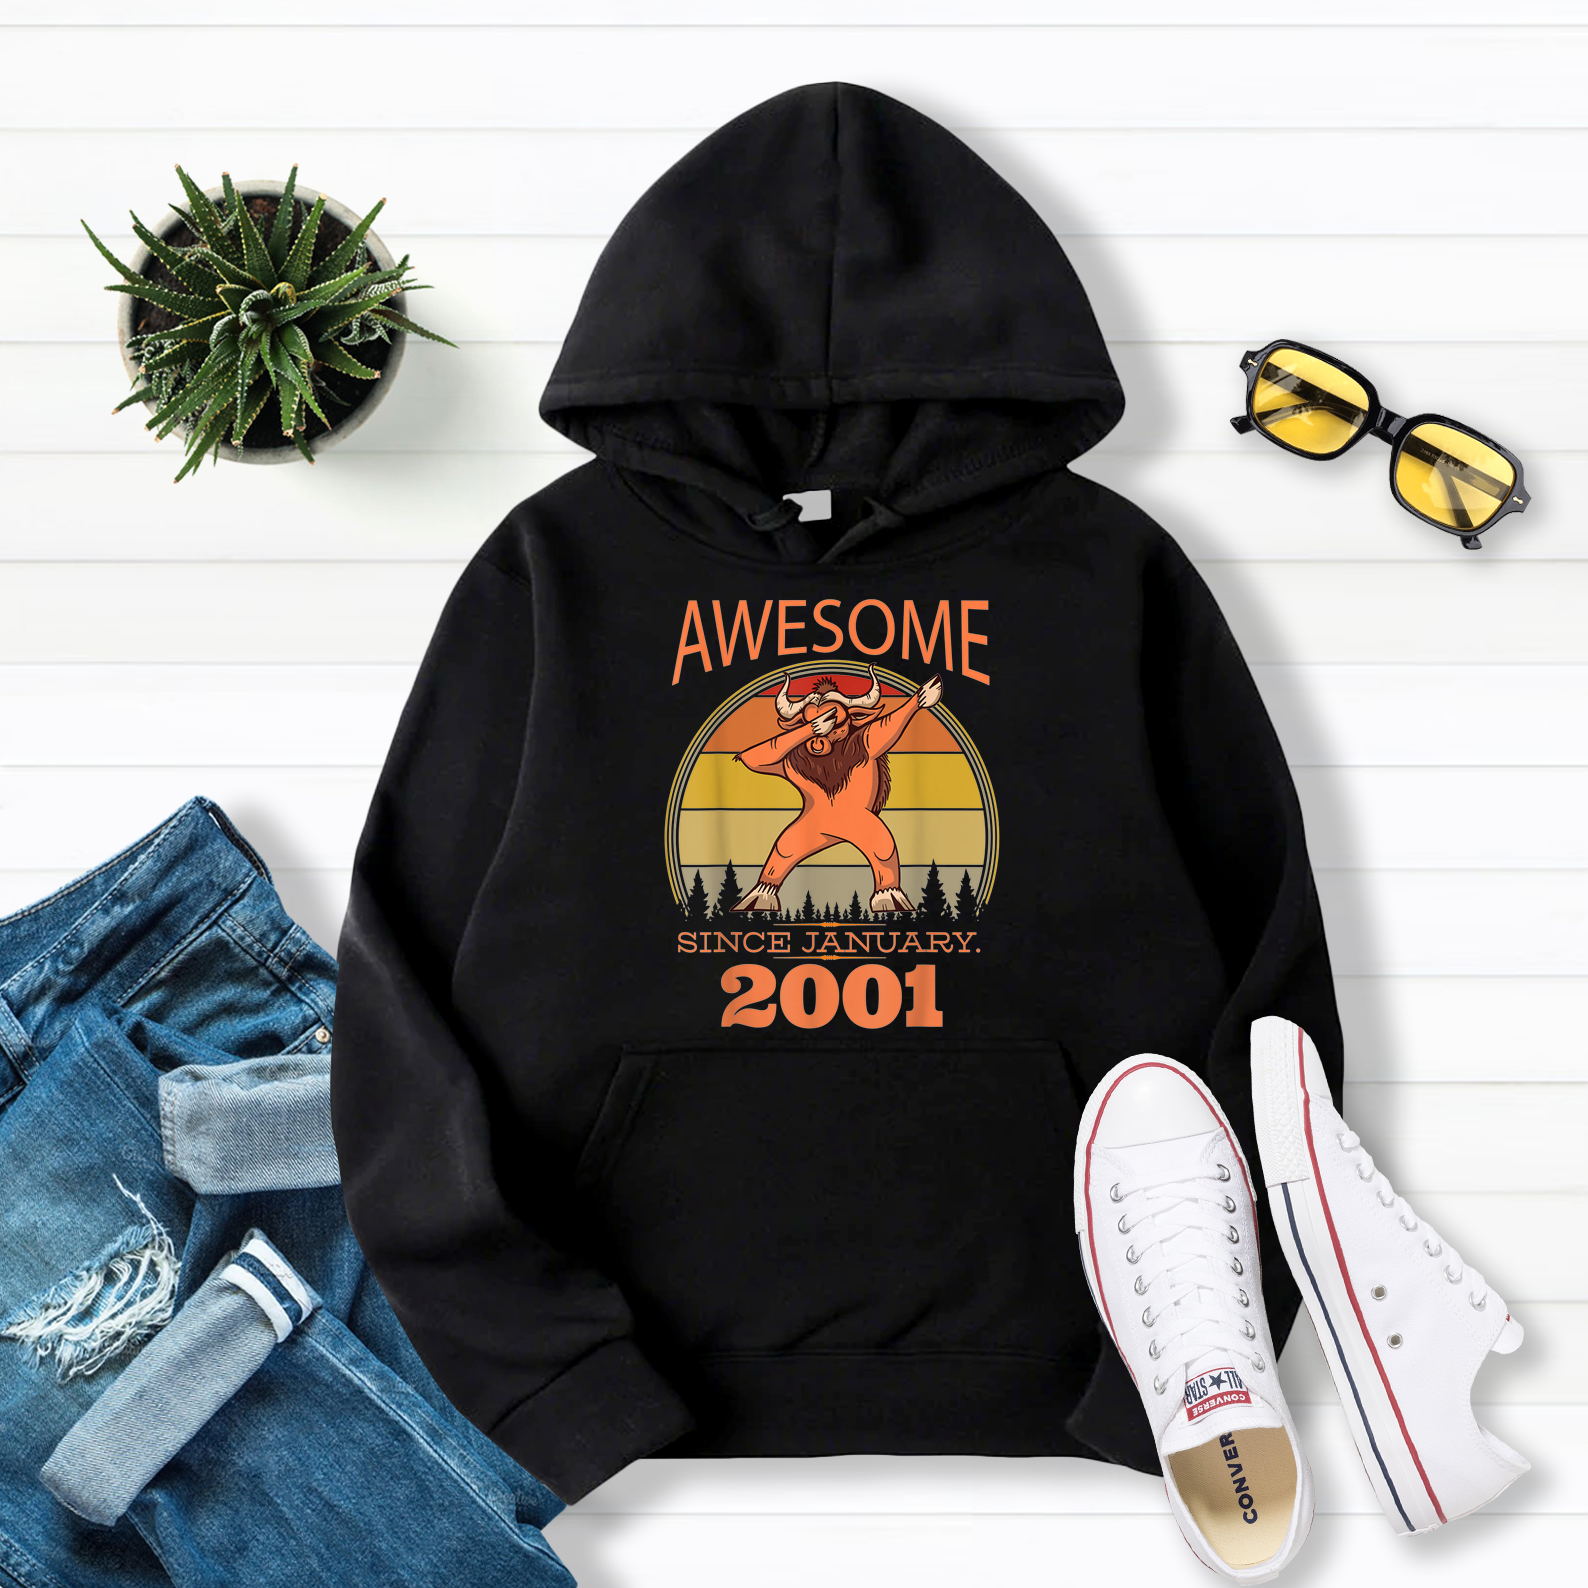 20 Years Old Birthday Awesome Since January 2001 Ox Dabbing Pullover Hoodie Black S-5XL